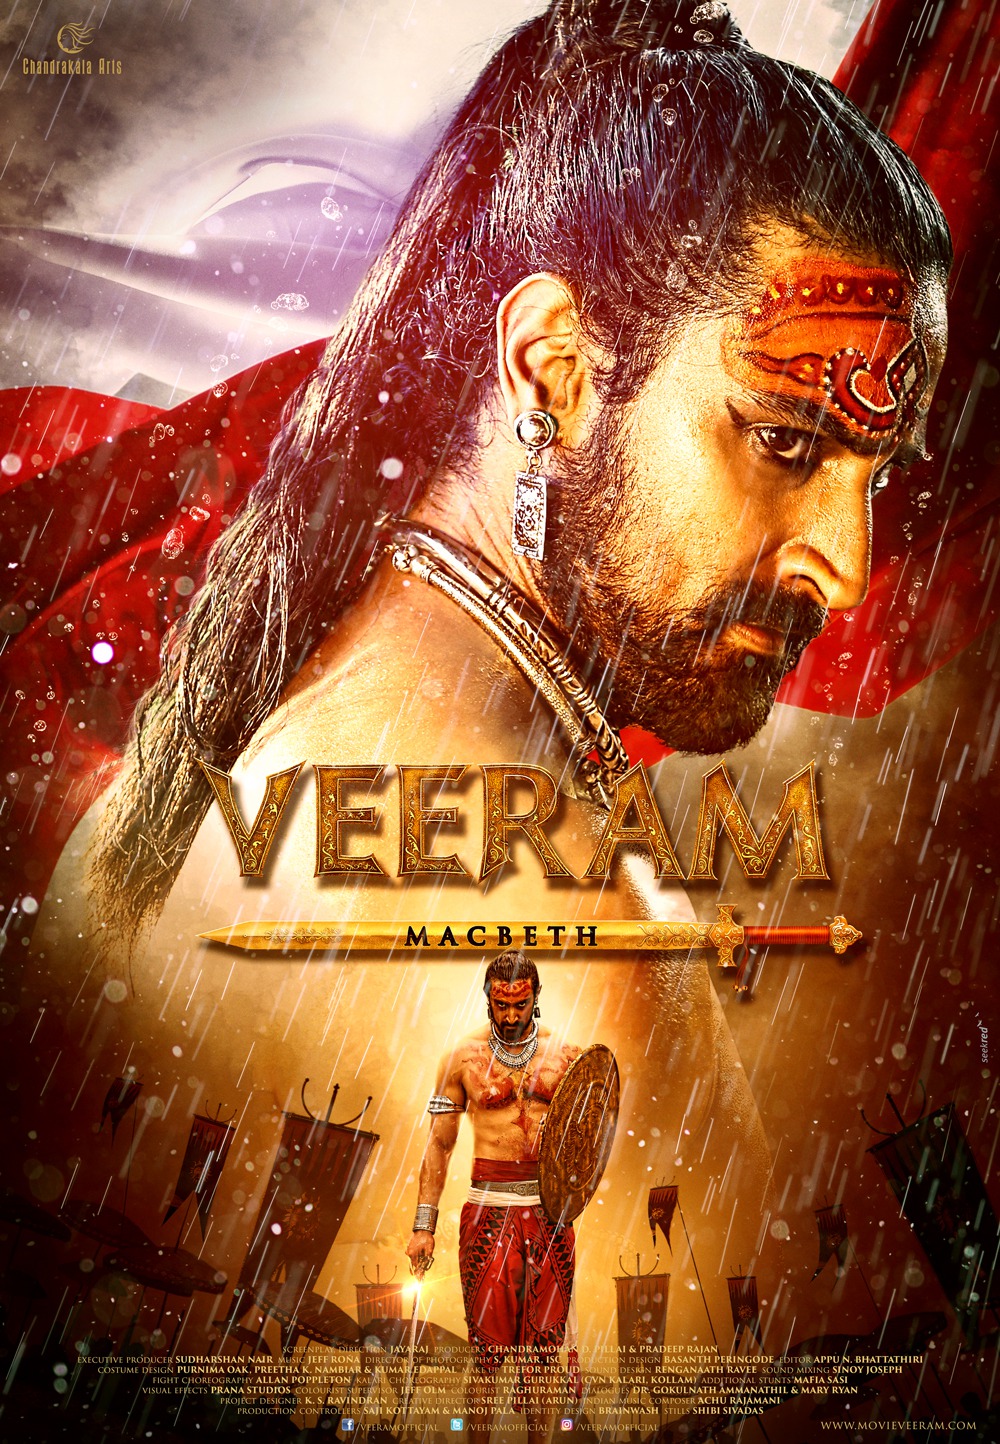 Extra Large Movie Poster Image for Veeram: Macbeth (#2 of 2)